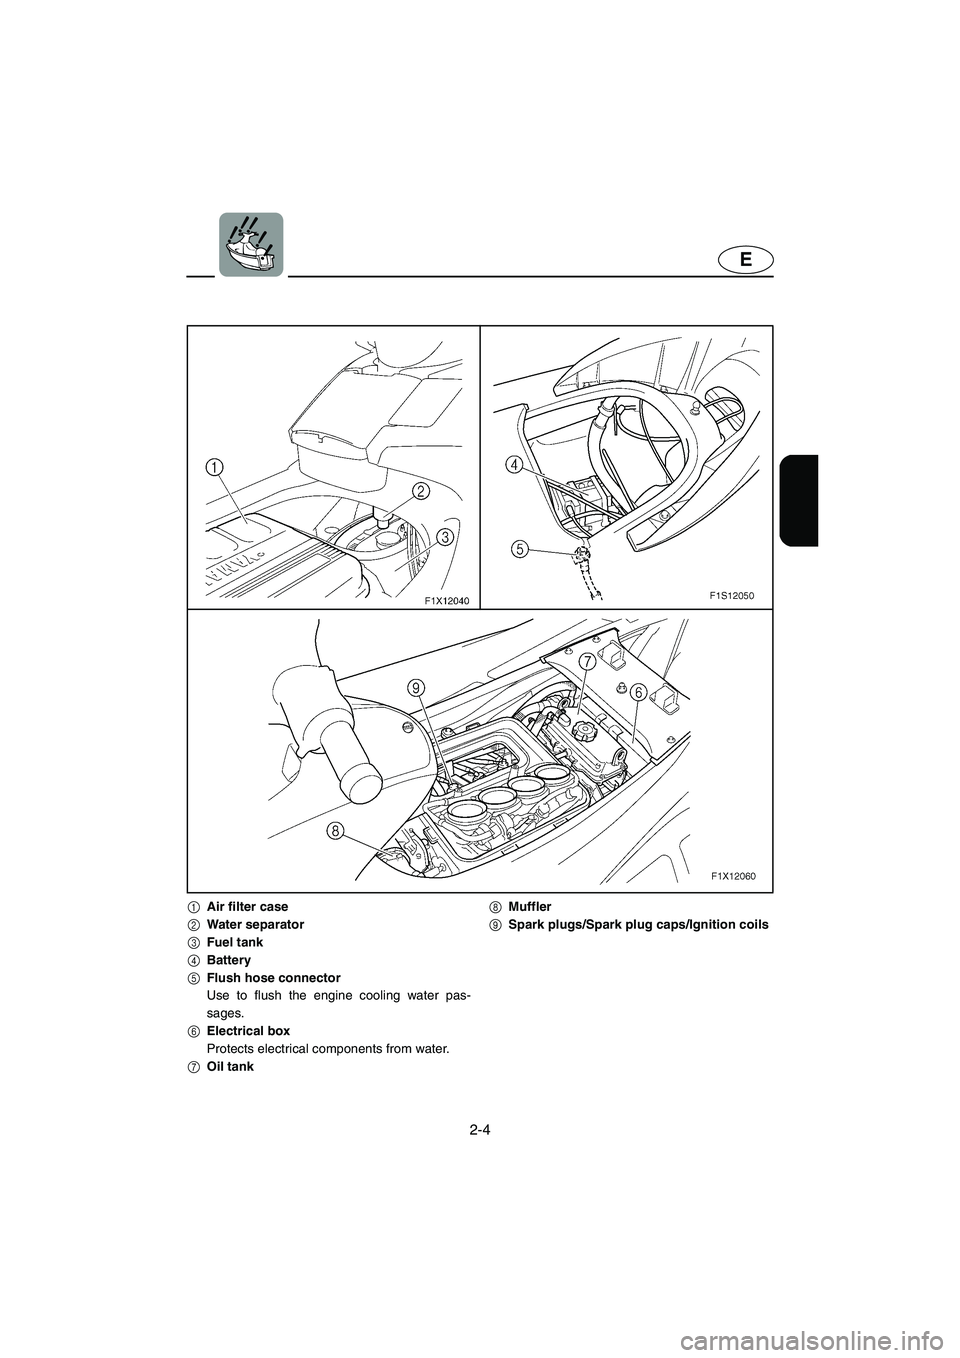 YAMAHA FX HO 2006 Owners Guide 2-4
E
1Air filter case
2Water separator
3Fuel tank
4Battery
5Flush hose connector
Use to flush the engine cooling water pas-
sages.
6Electrical box
Protects electrical components from water.
7Oil tank